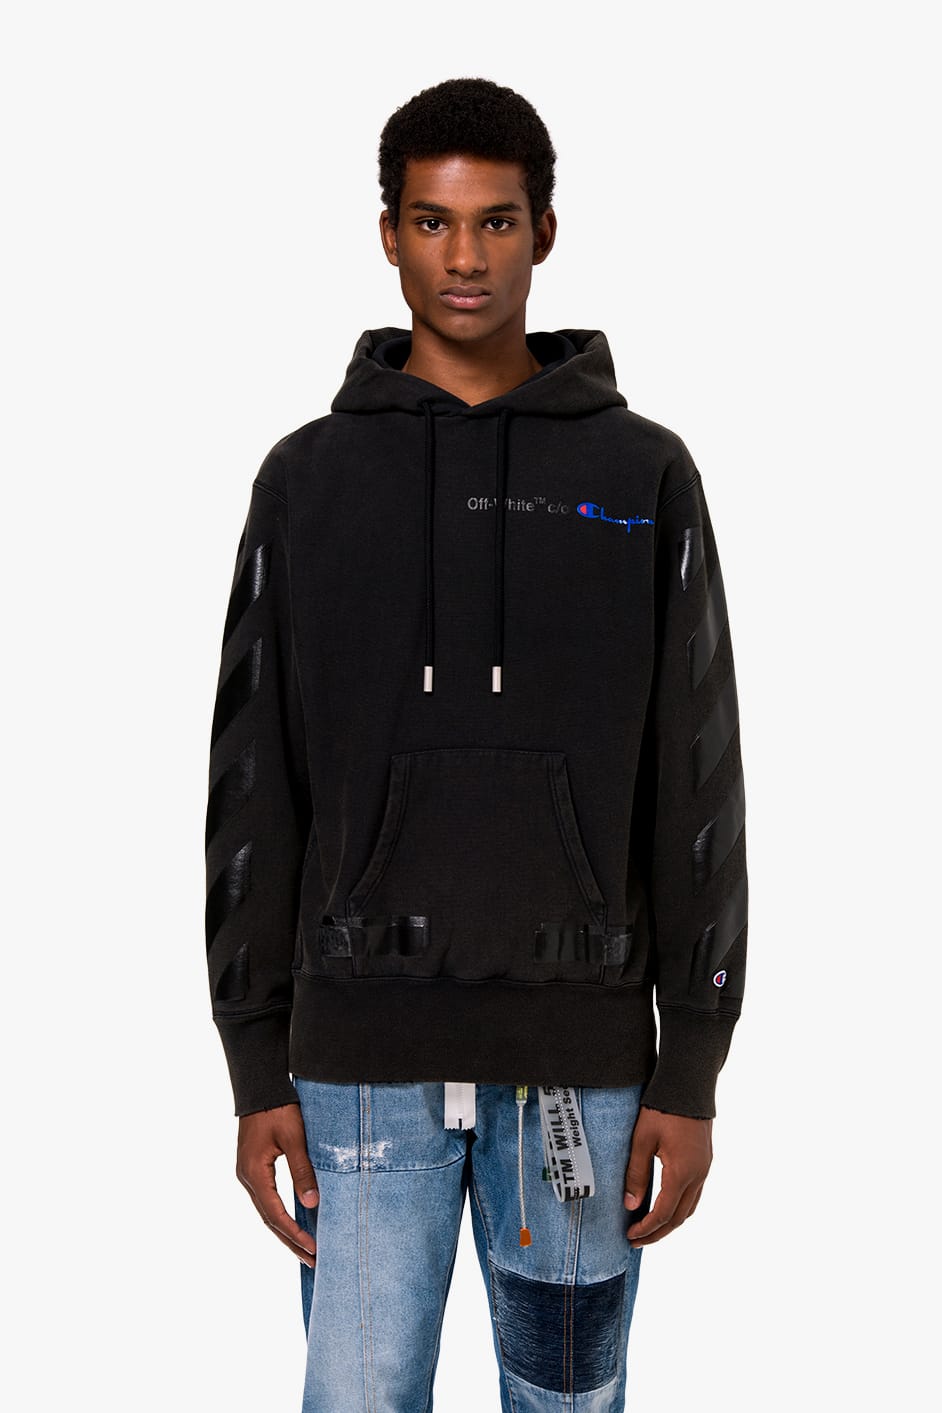 Most Expensive Off White Hoodie Online, 57% OFF | www.simbolics.cat